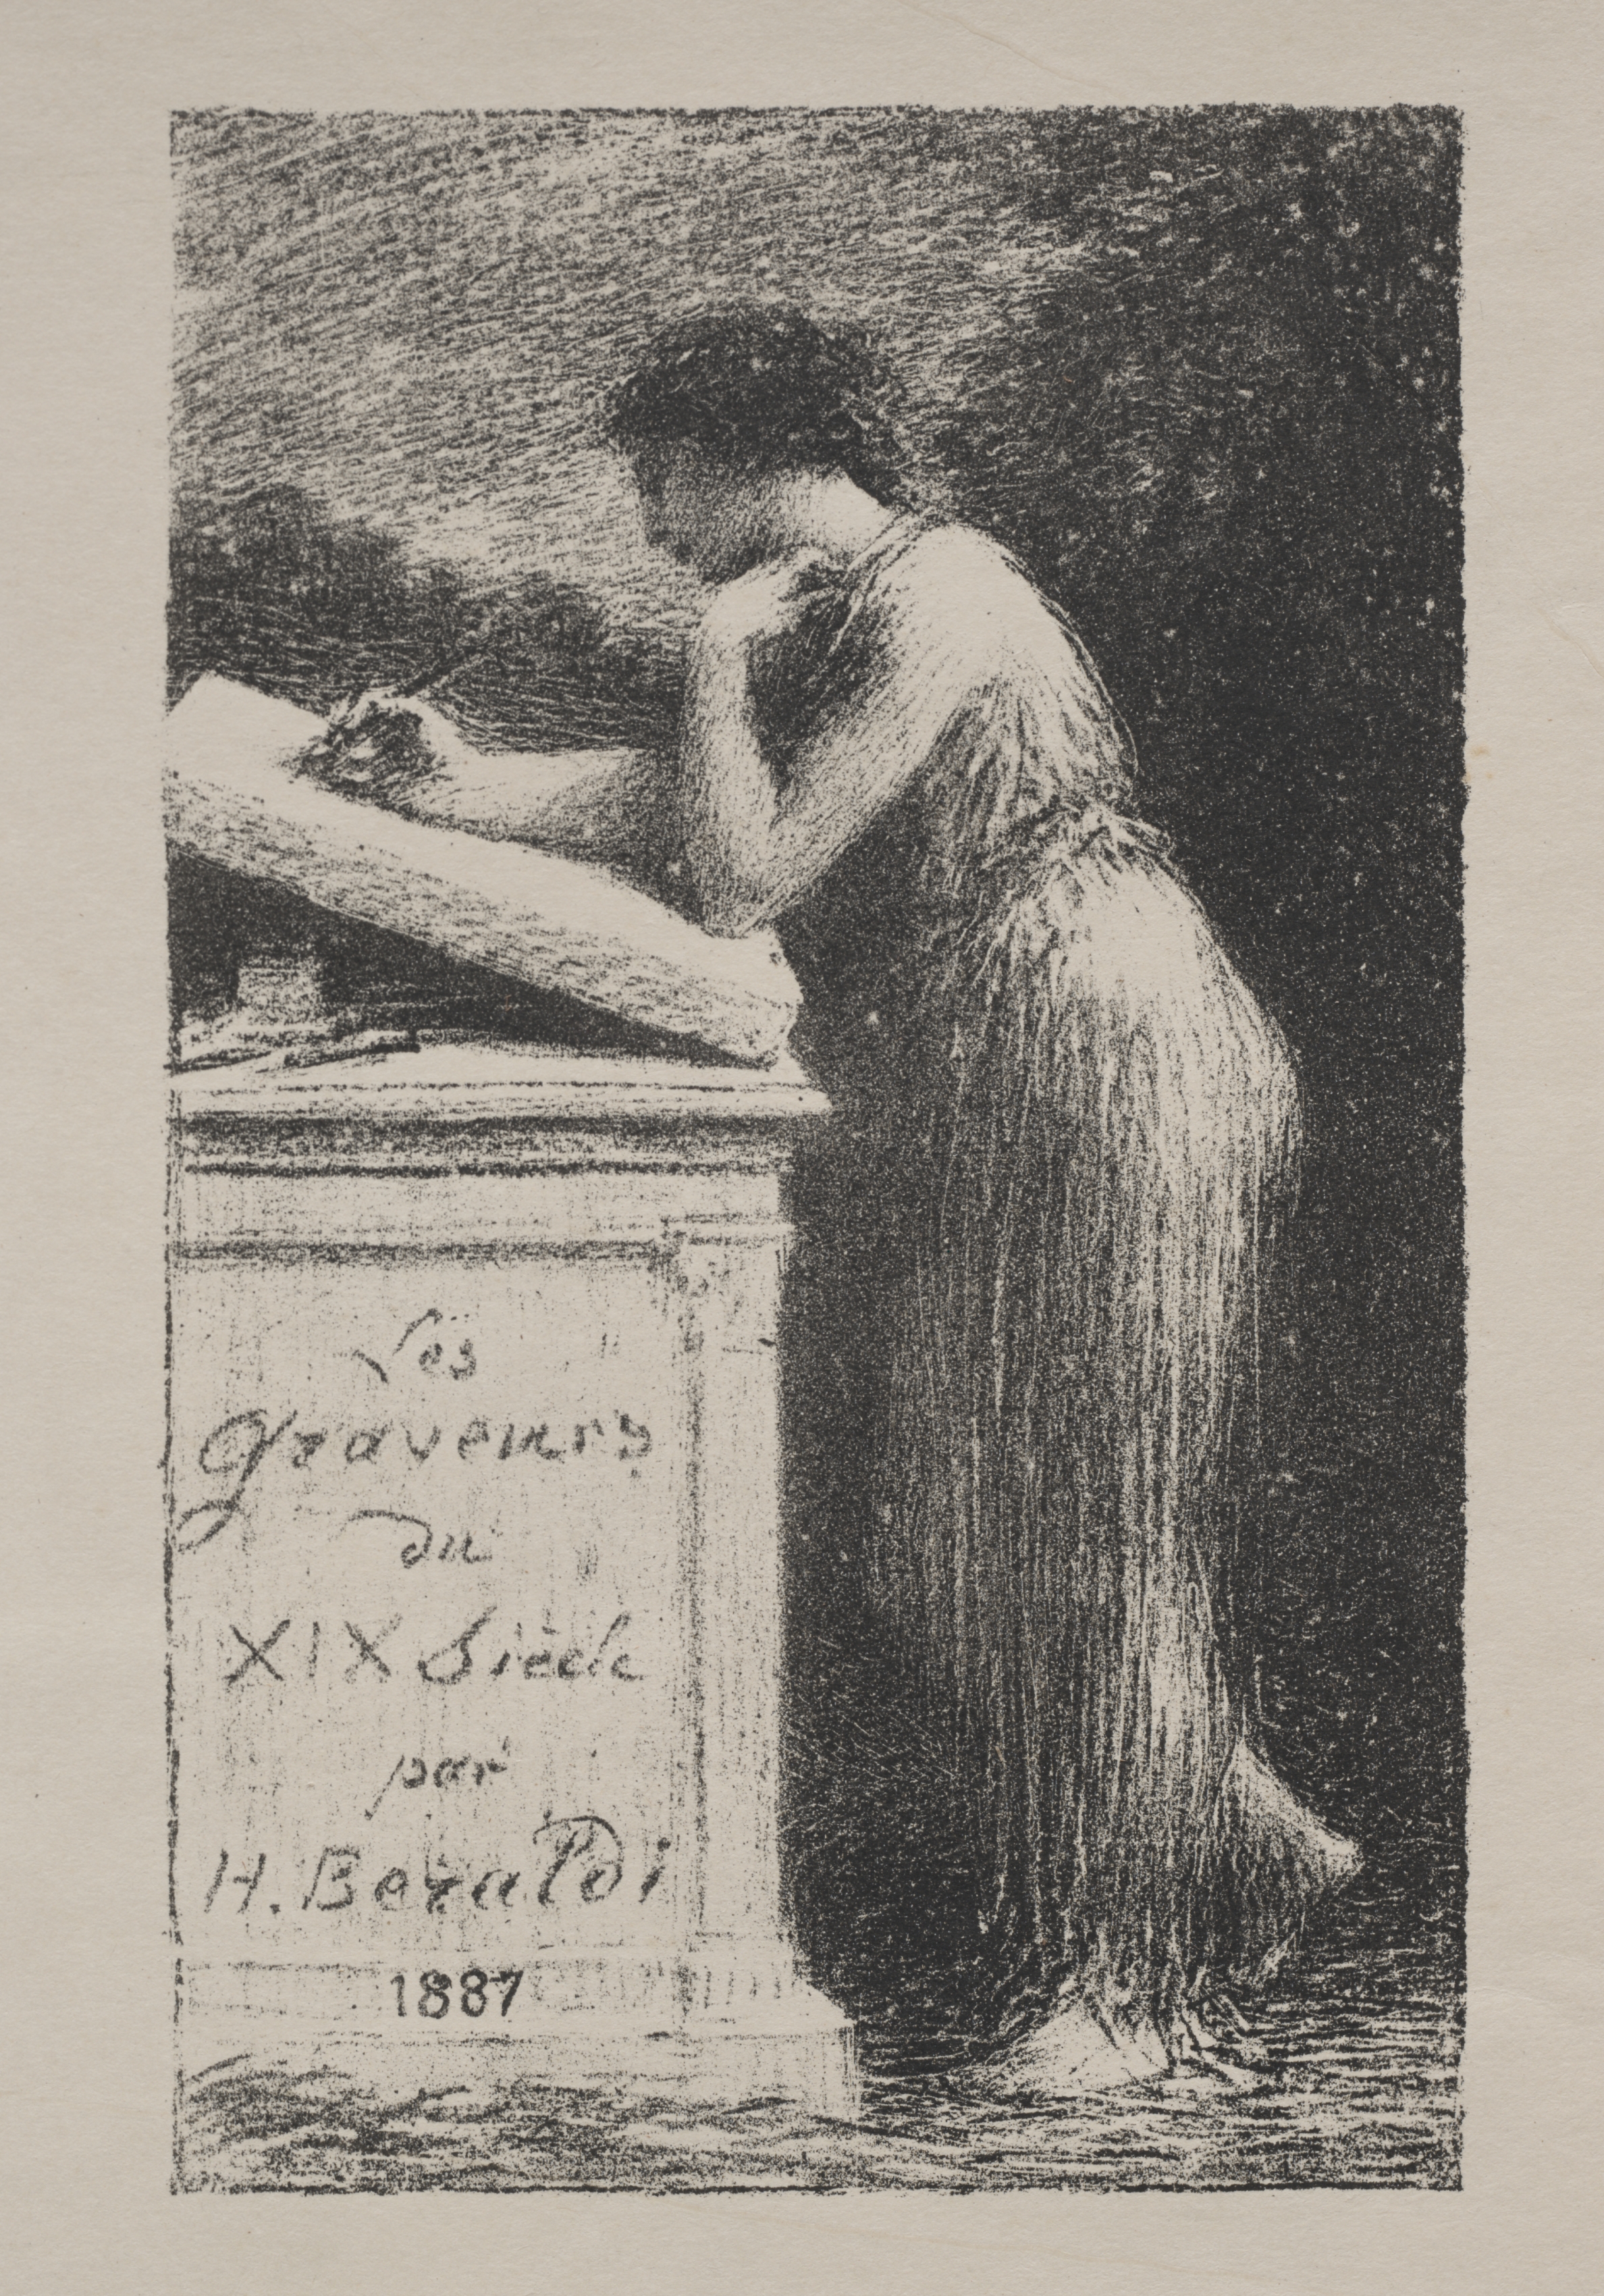 The Lithograph